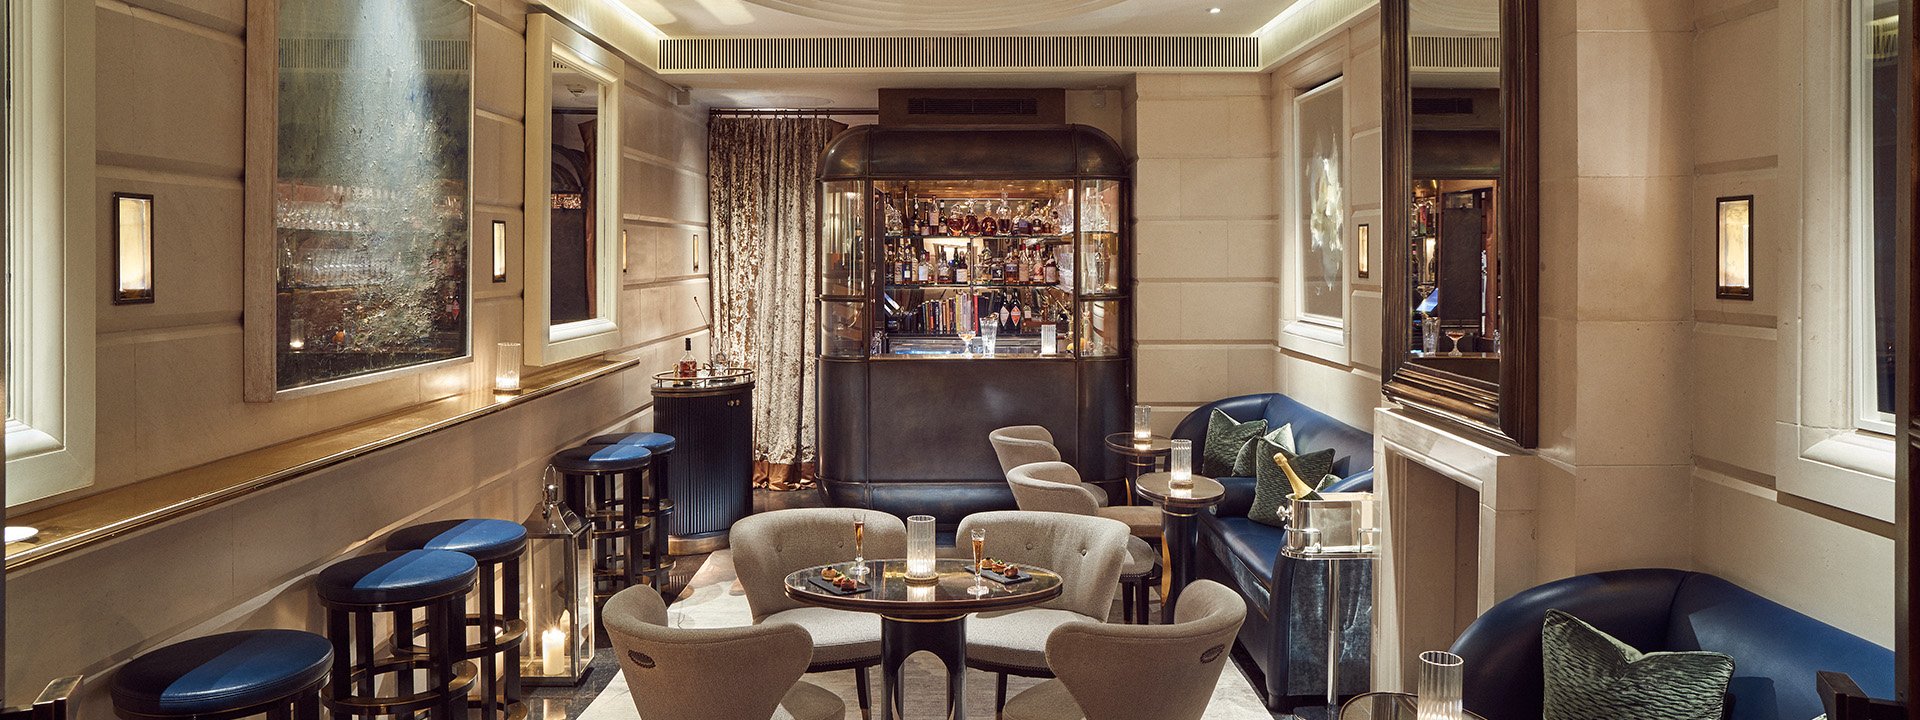 Interior of the Champagne Room for private hire at The Connaught